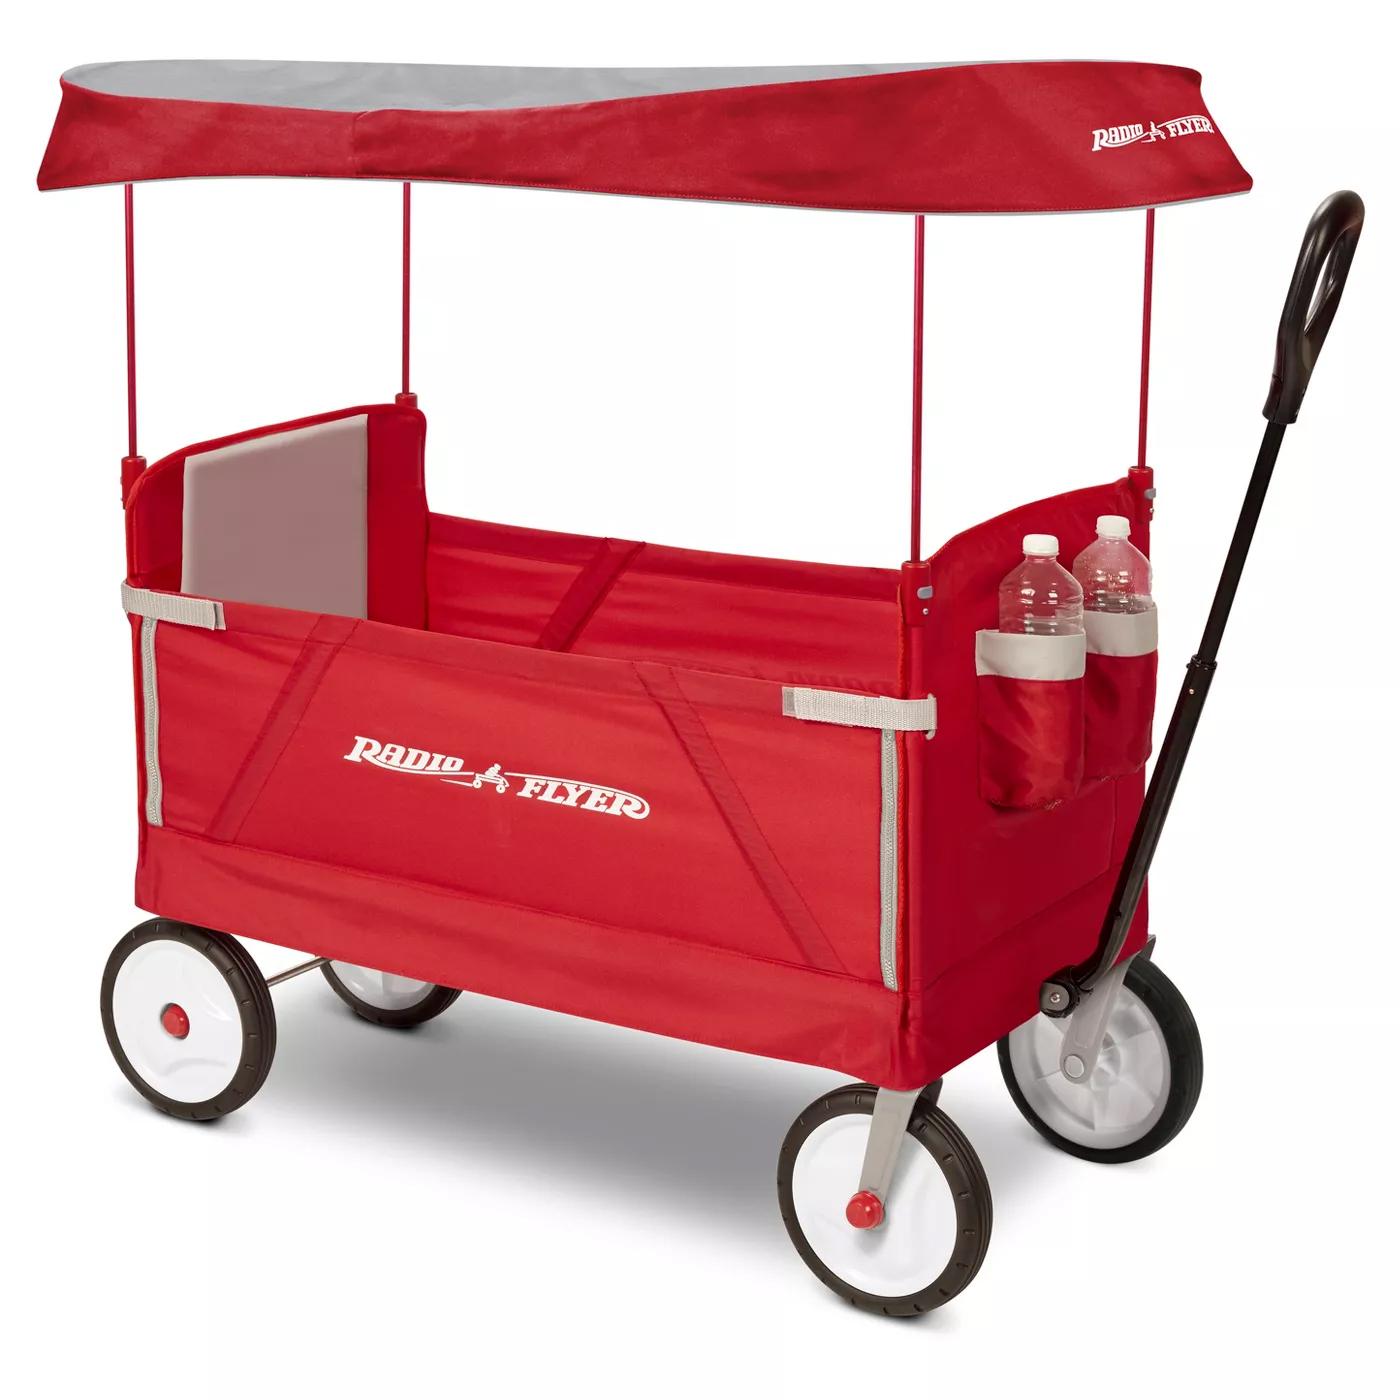 Radio Flyer 3 in 1 EZ Fold Wagon with Canopy for $69 Shipped